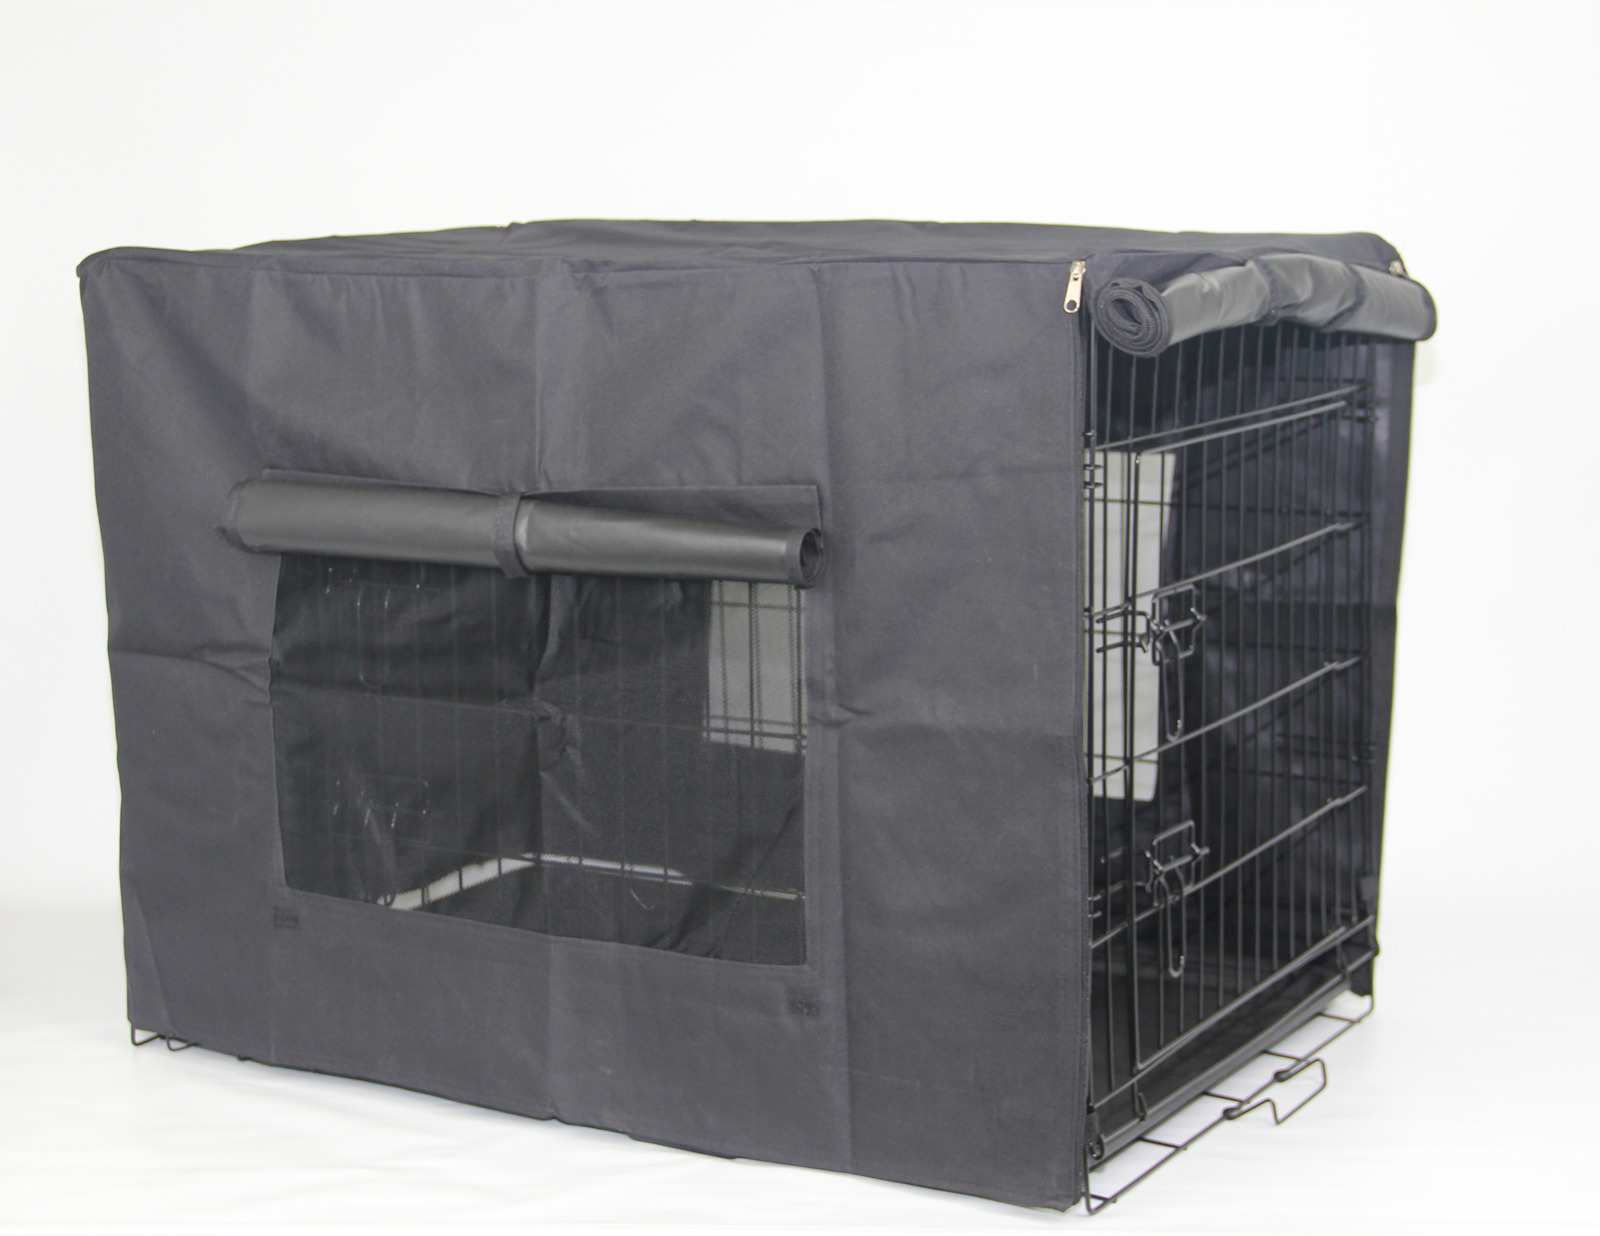 42′ Portable Foldable Dog Cat Rabbit Collapsible Crate Pet Rabbit Cage with Cover